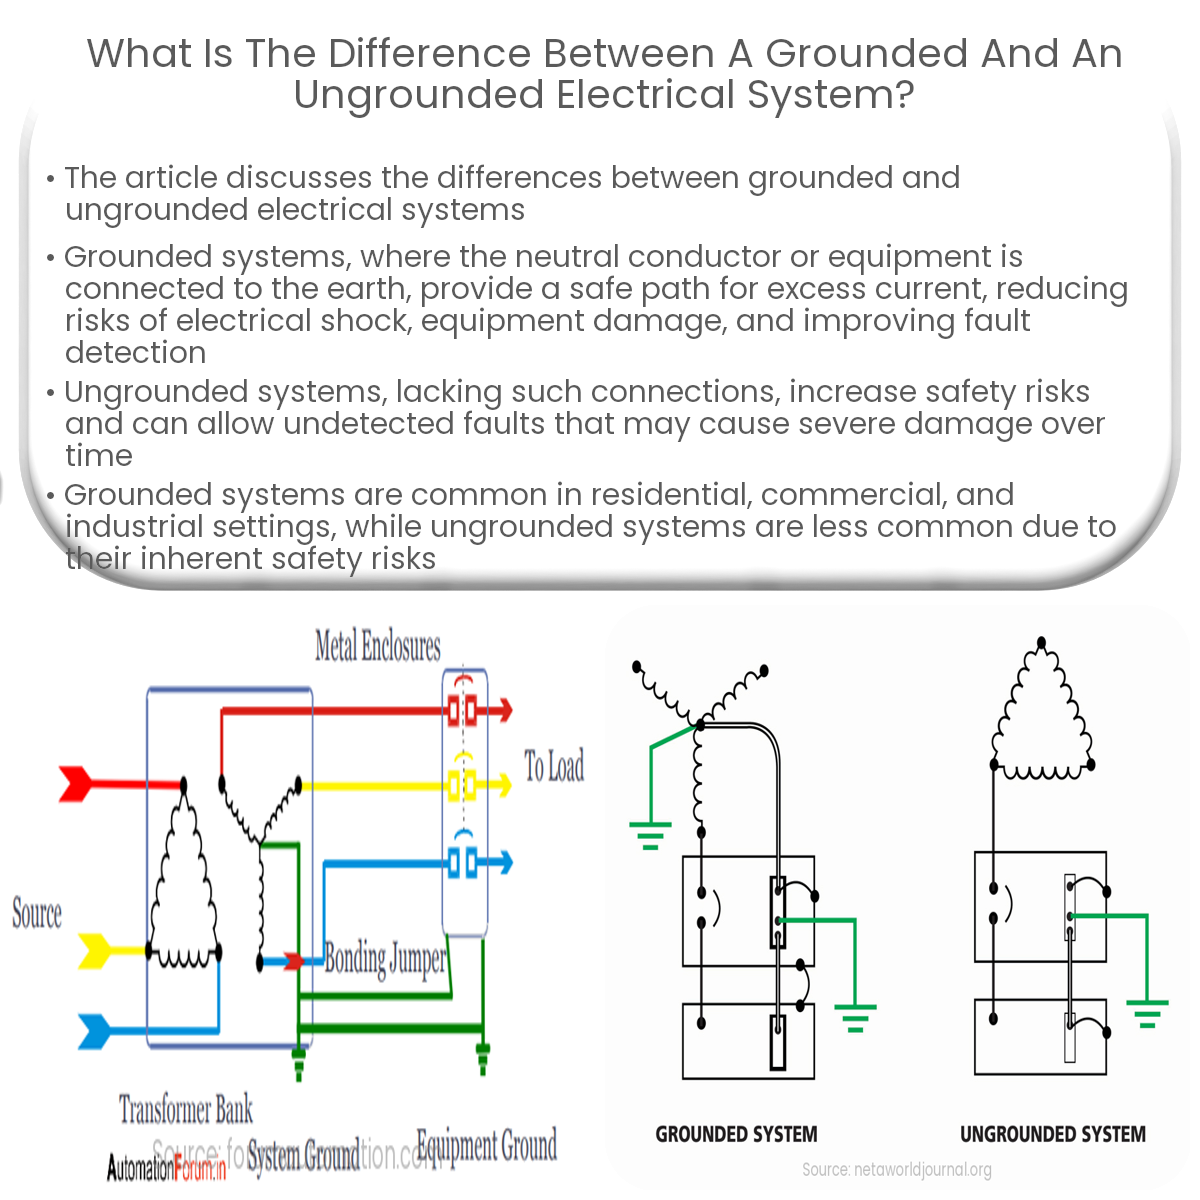 What is the difference between a grounded and an ungrounded electrical system?